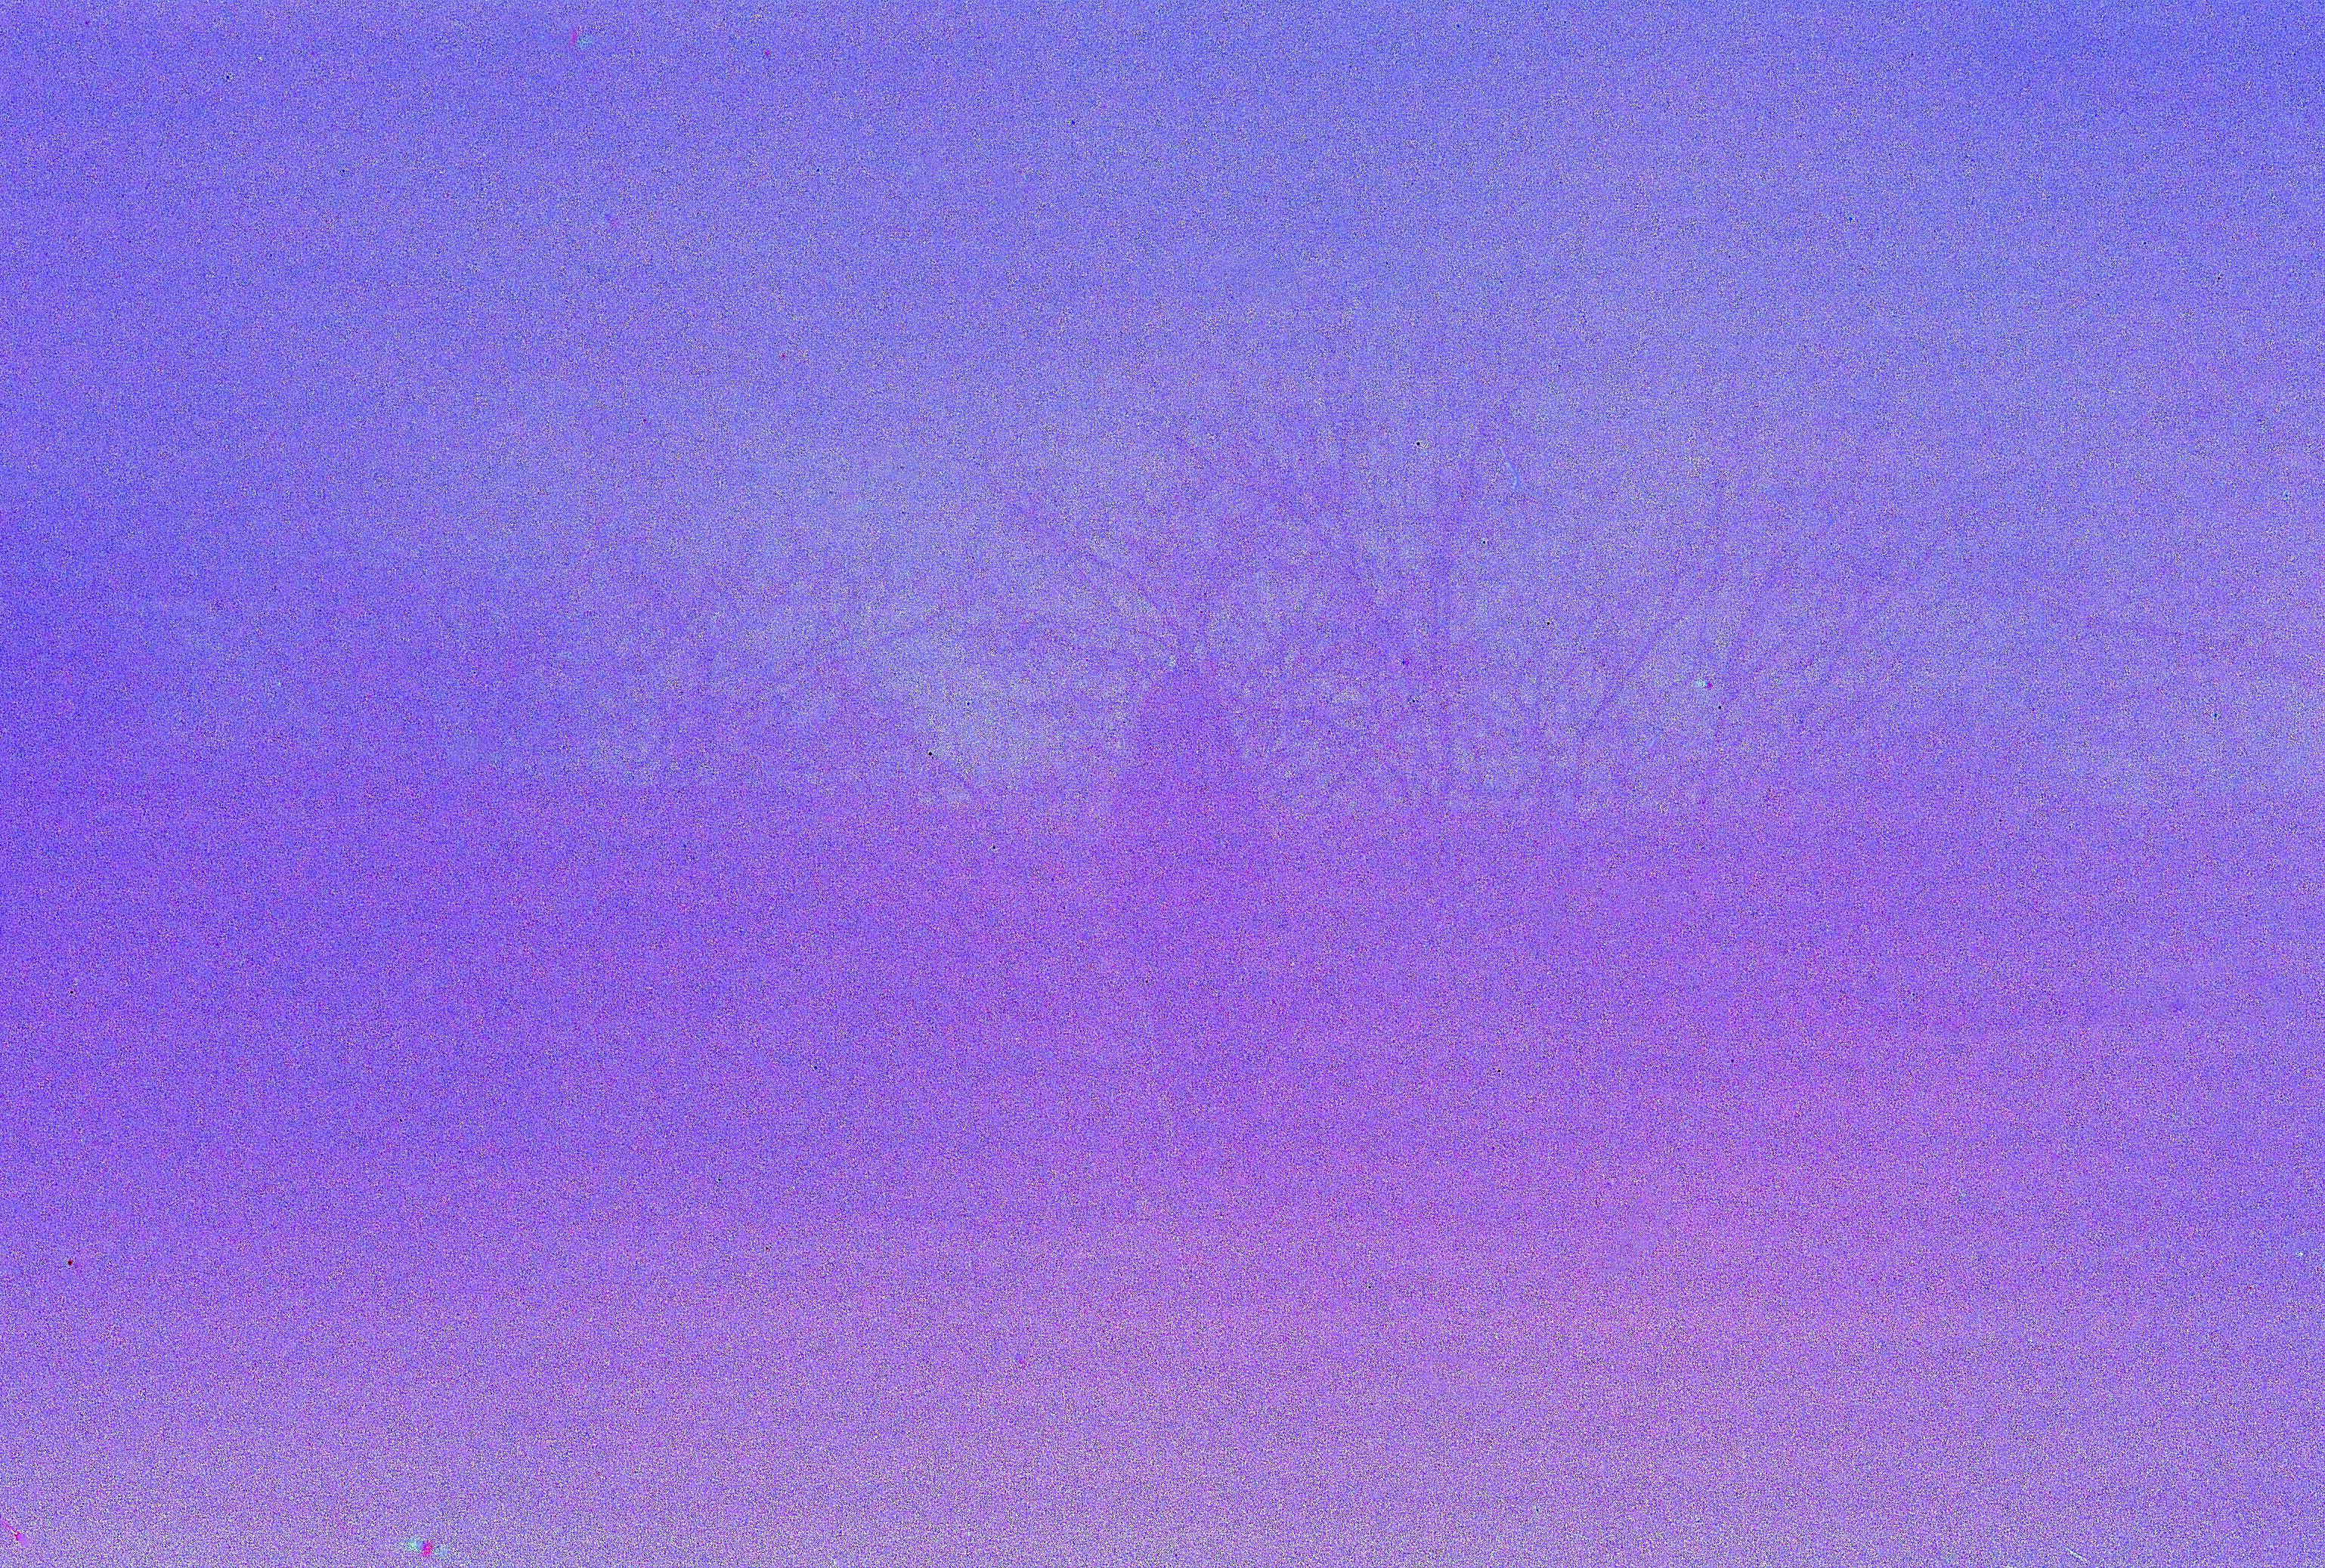 Dim, foggy purple hued photo of a man standing in the distance facing away from the camera. Bare trees can be seen in the background.